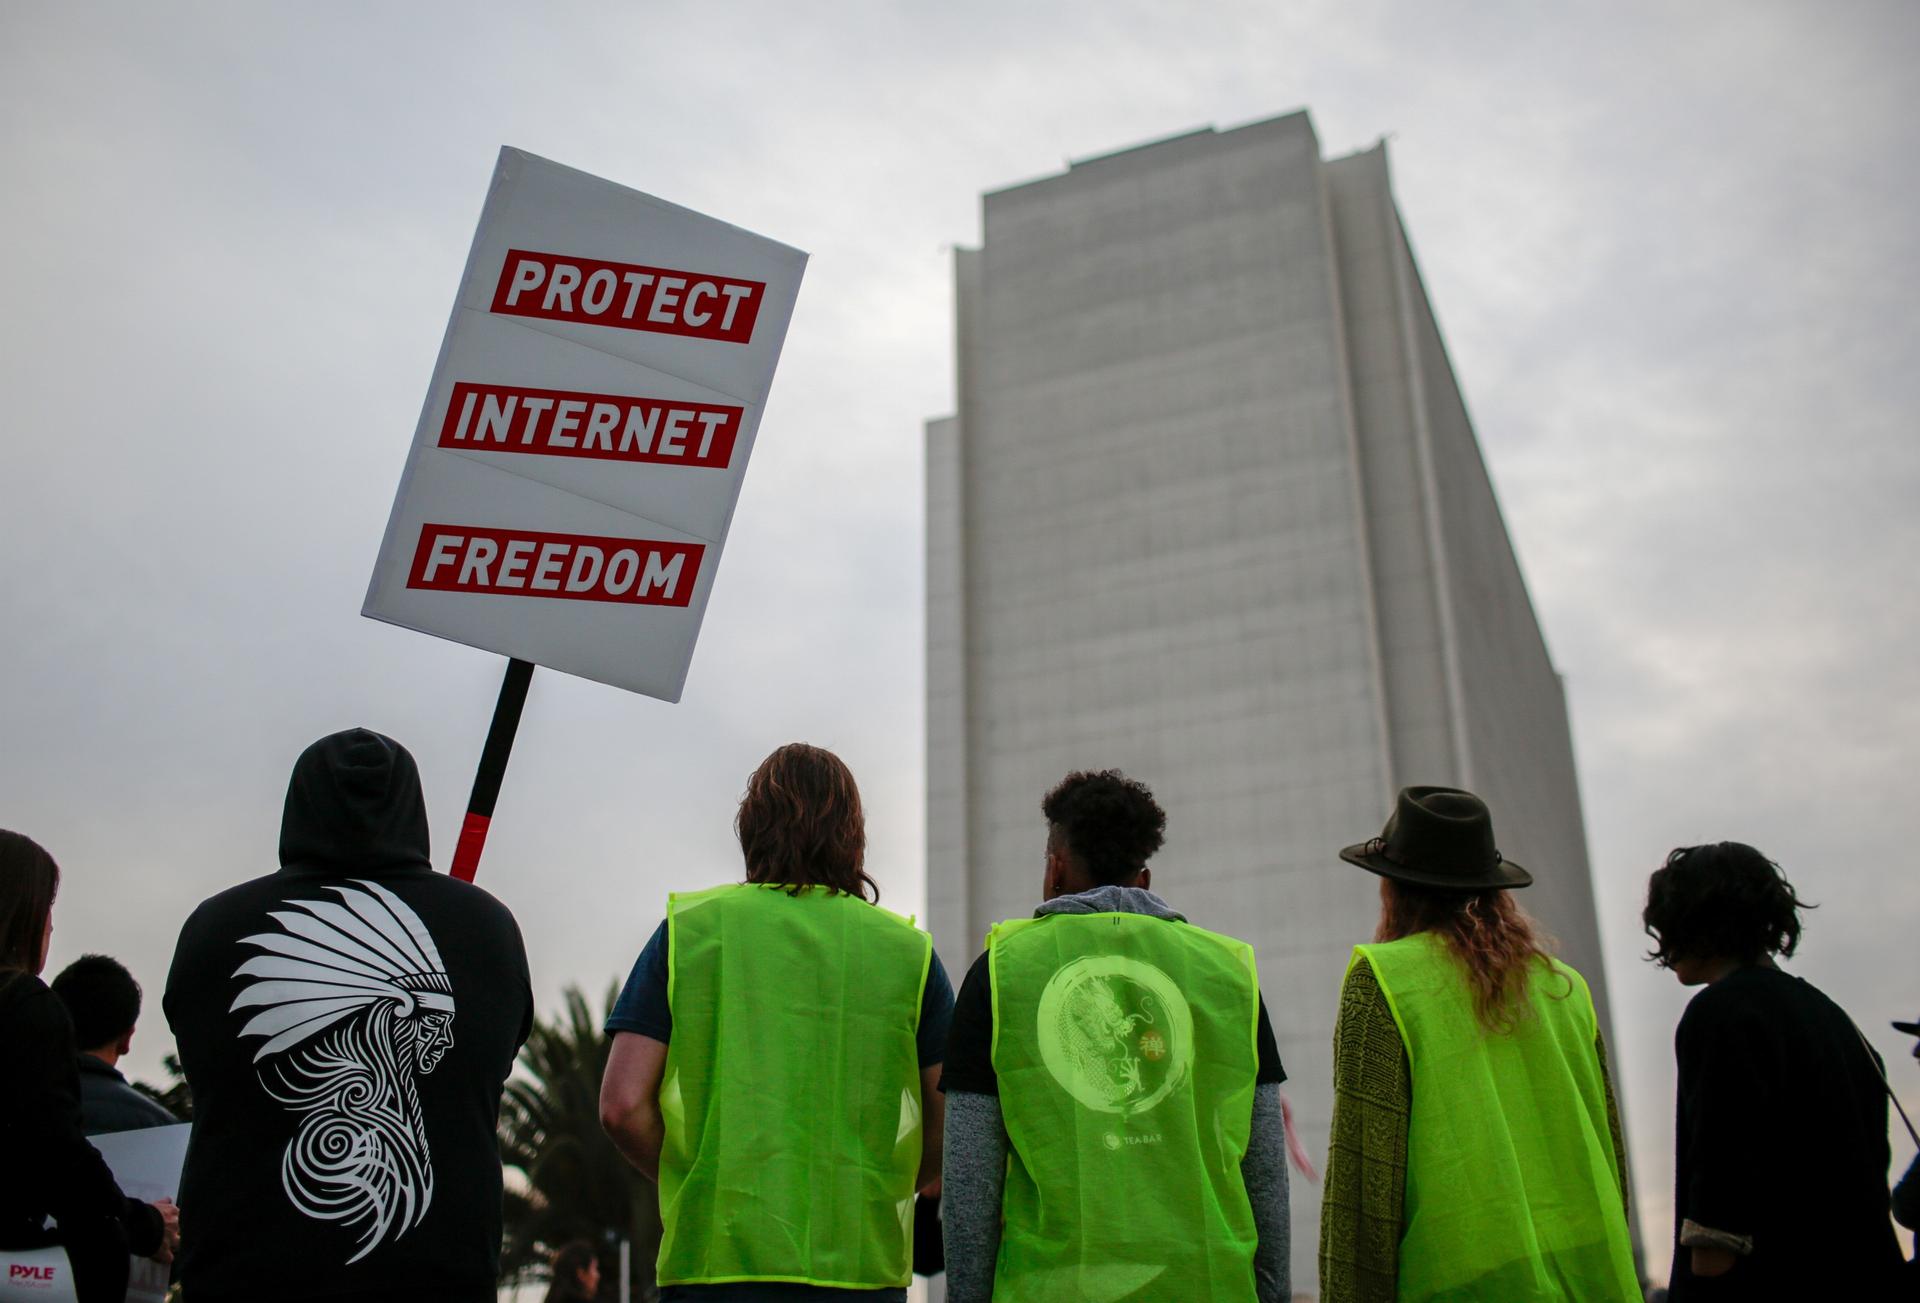 Supporters of Net Neutrality protest